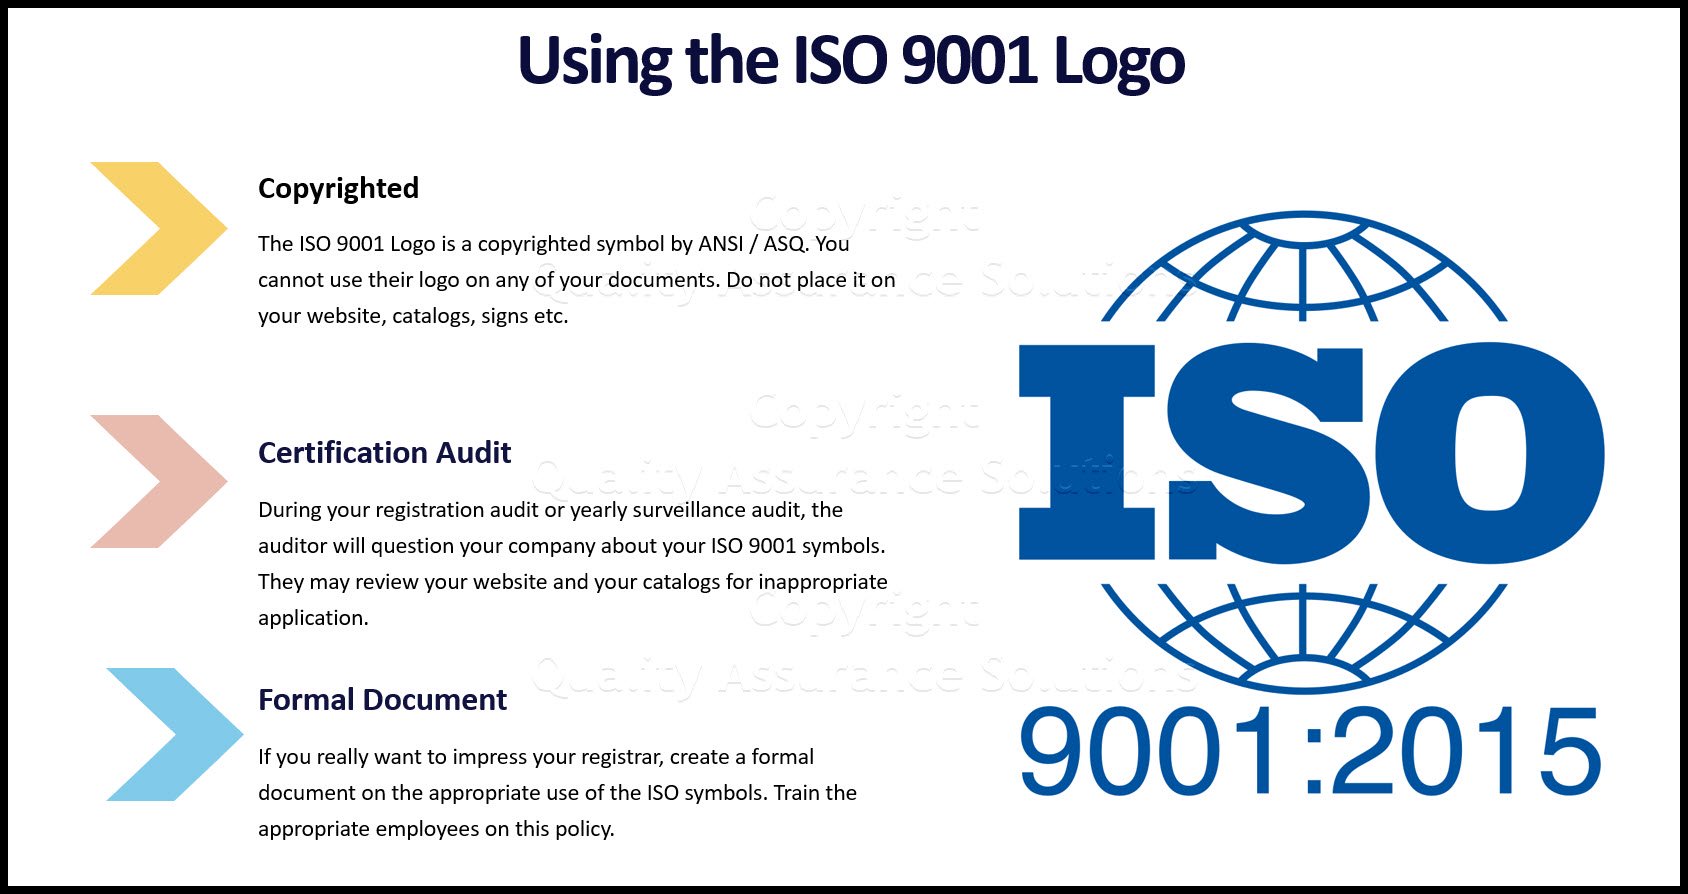 If your looking for an ISO 9001 logo, review this page first!